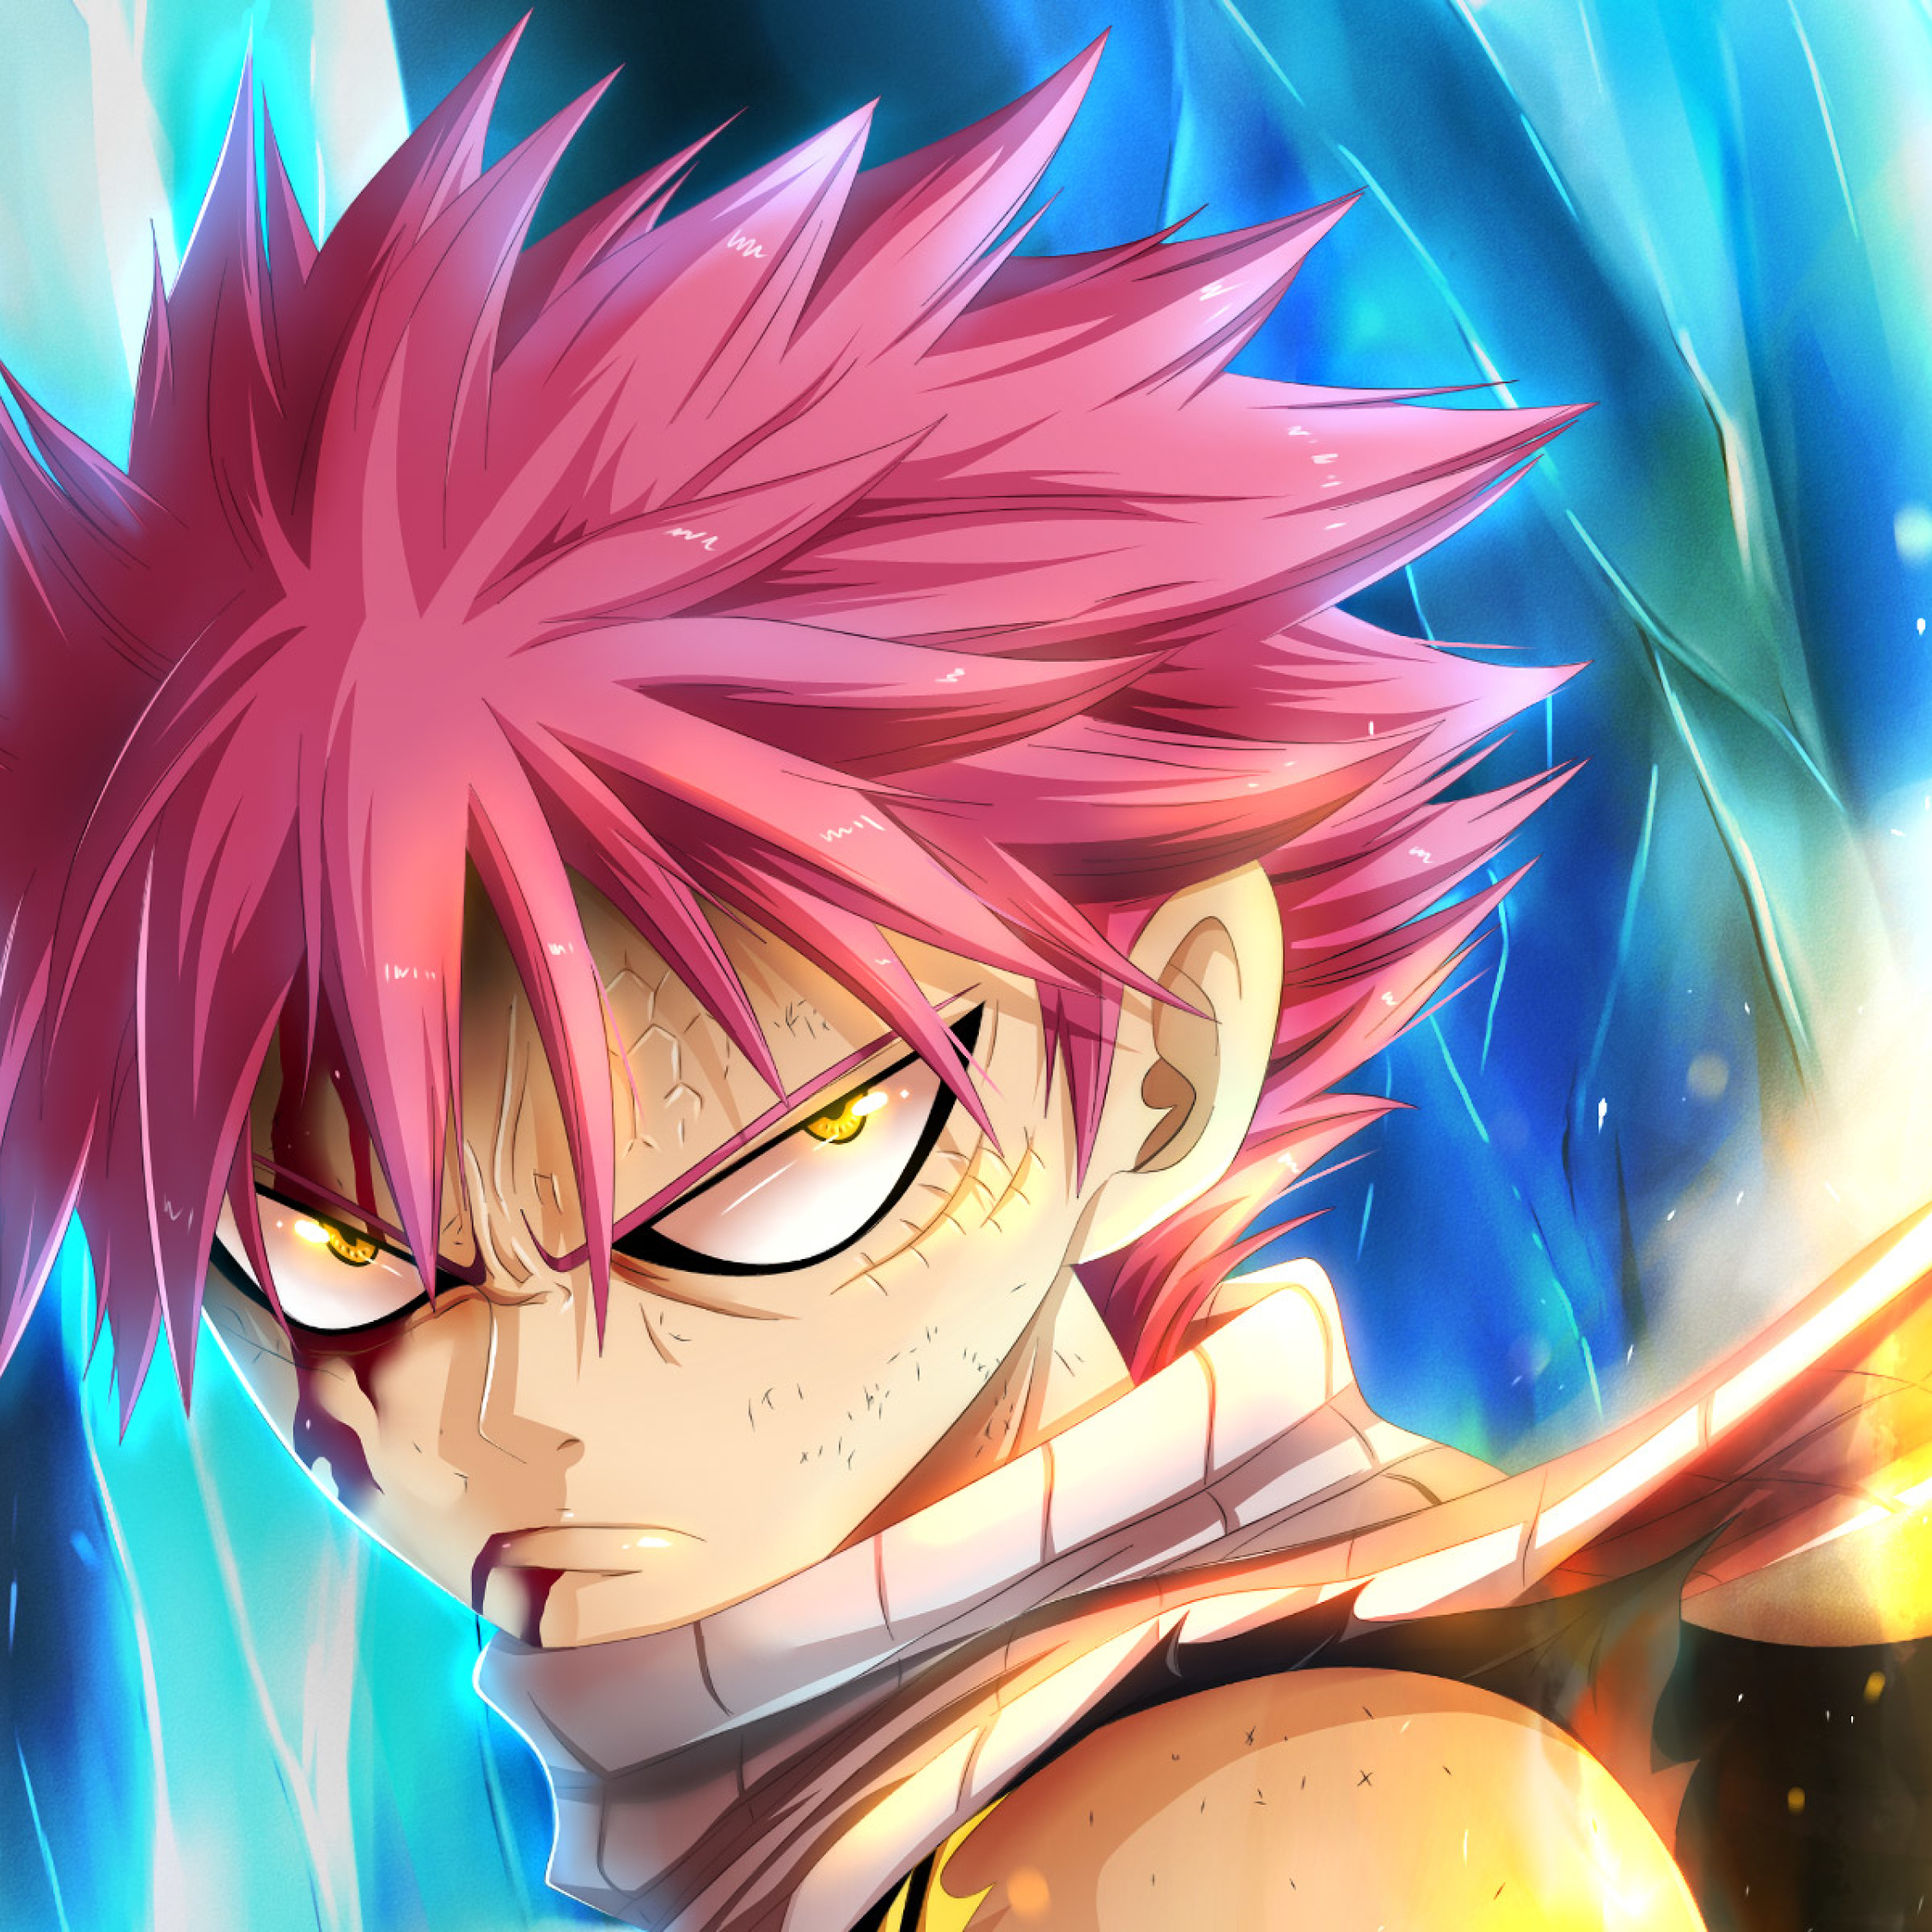 Download Fairy Tail Anime - whatiseasysite